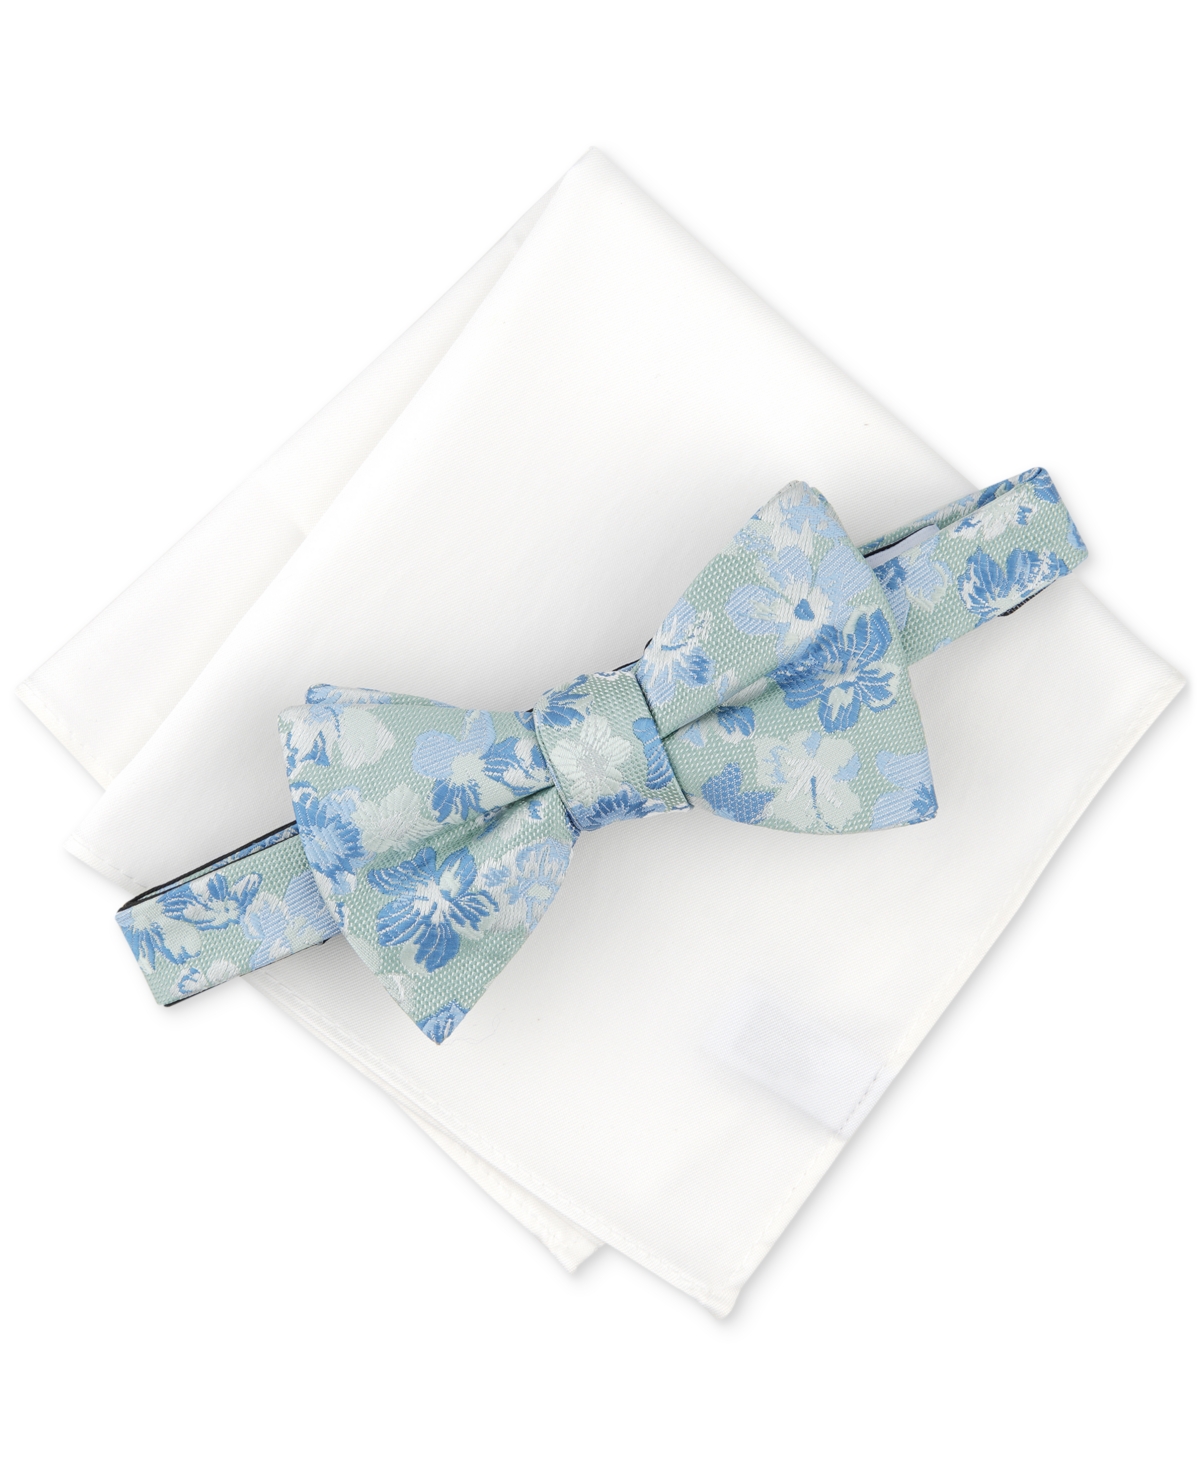 Men's Rhodes Floral Bow Tie & Solid Pocket Square Set, Created for Macy's - Mint